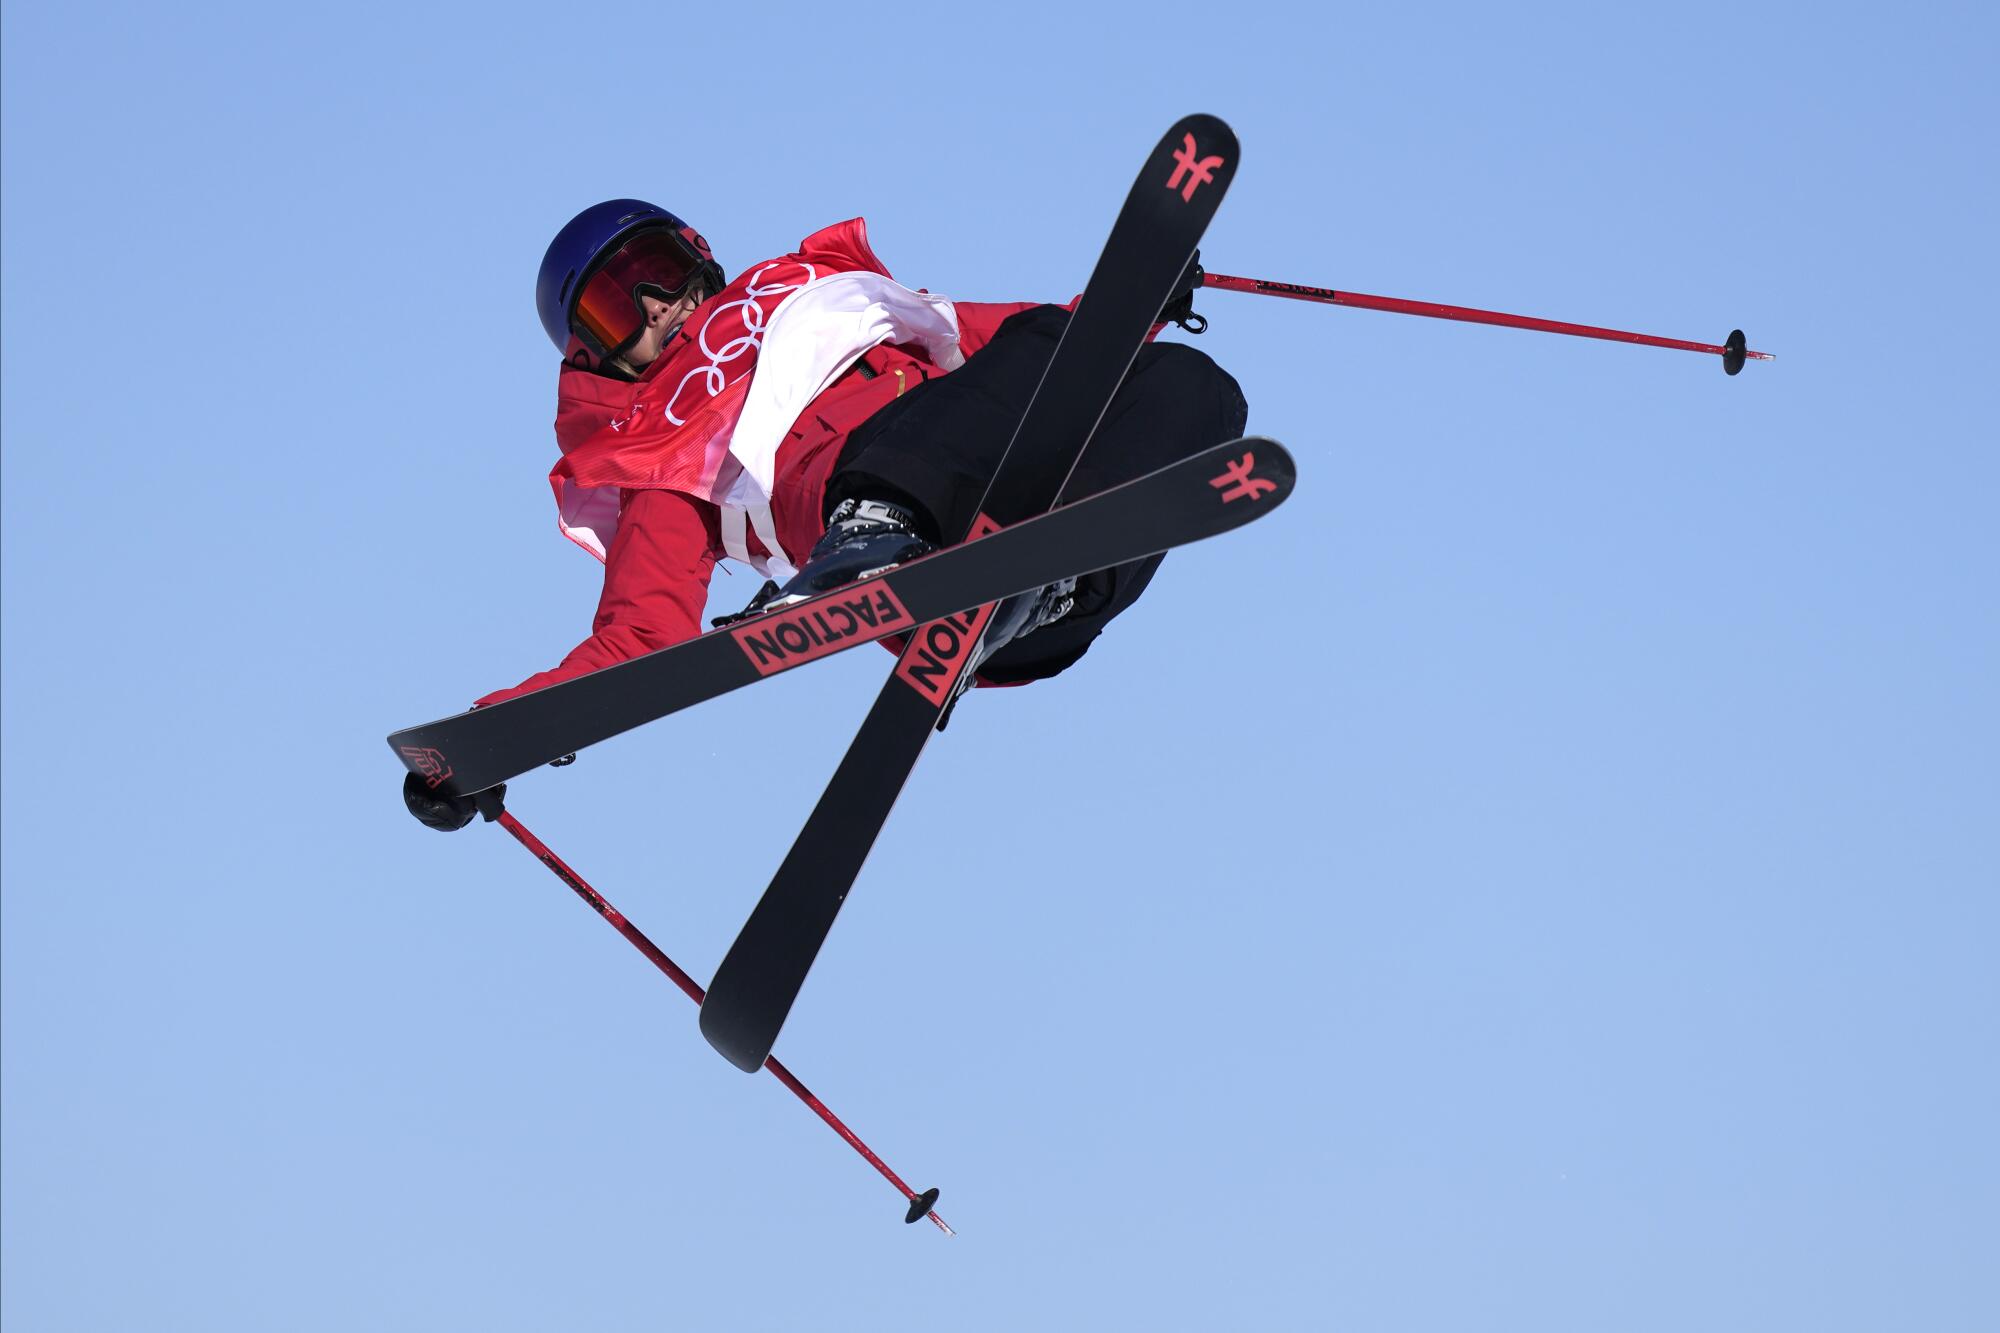 Rising ski star Eileen Gu models Chinese Olympic gear, turns Olympic  Village into a catwalk - TODAY